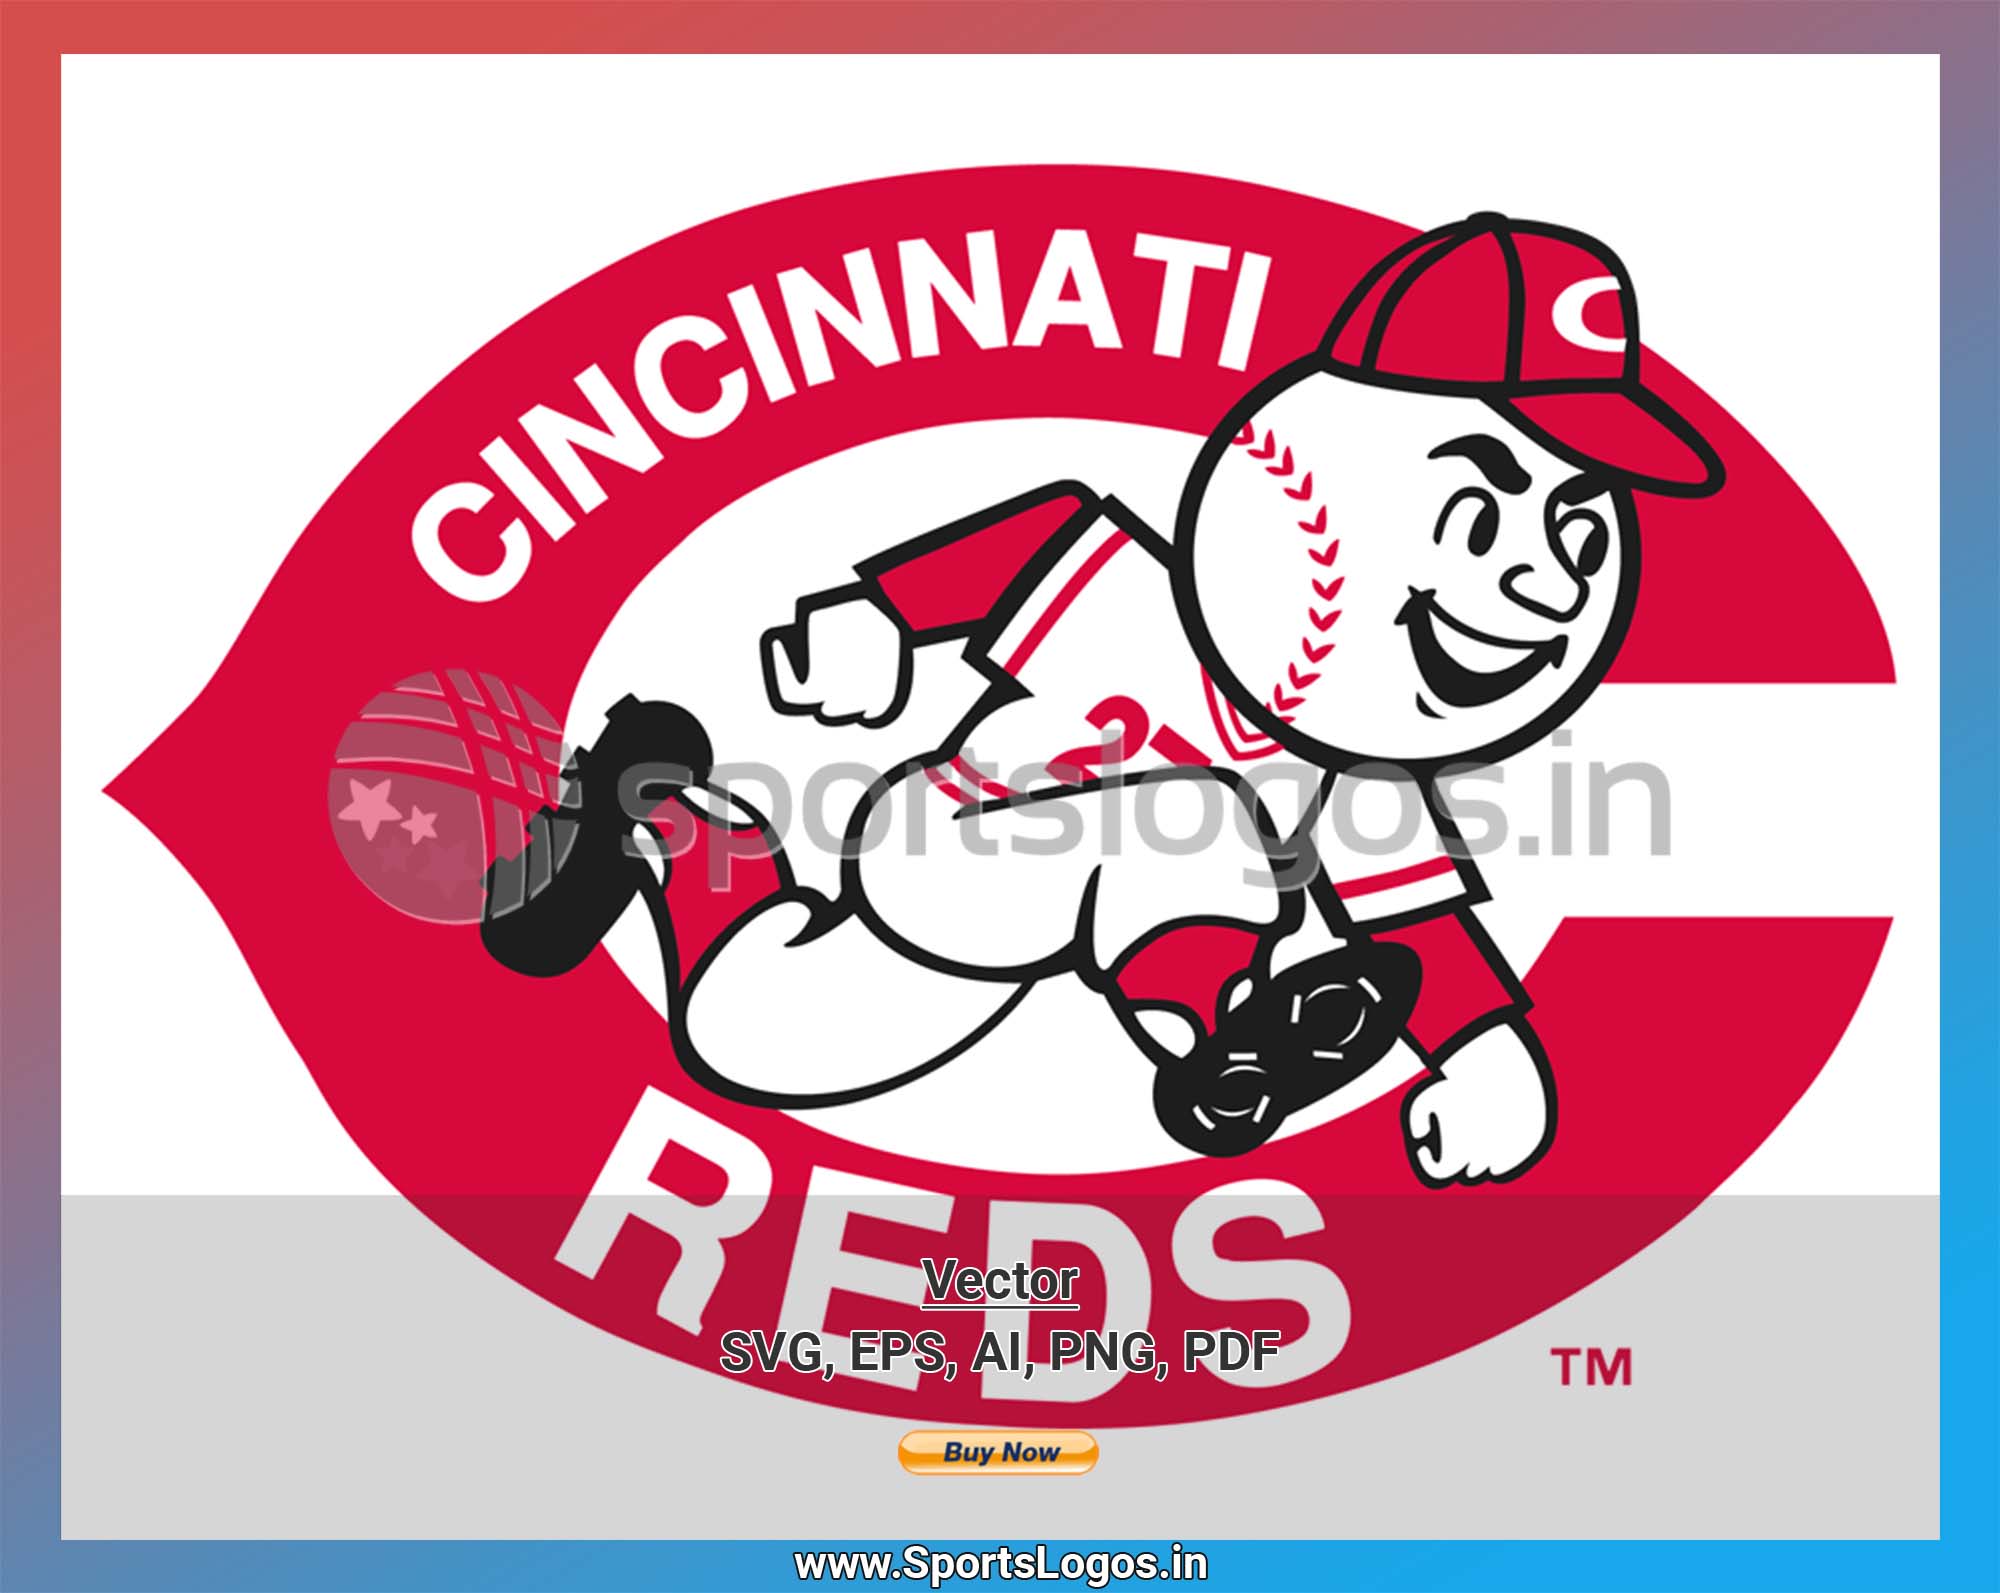 Cincinnati Reds - Baseball Sports Vector SVG Logo in 5 formats - SPLN000892  • Sports Logos - Embroidery & Vector for NFL, NBA, NHL, MLB, MiLB, and more!